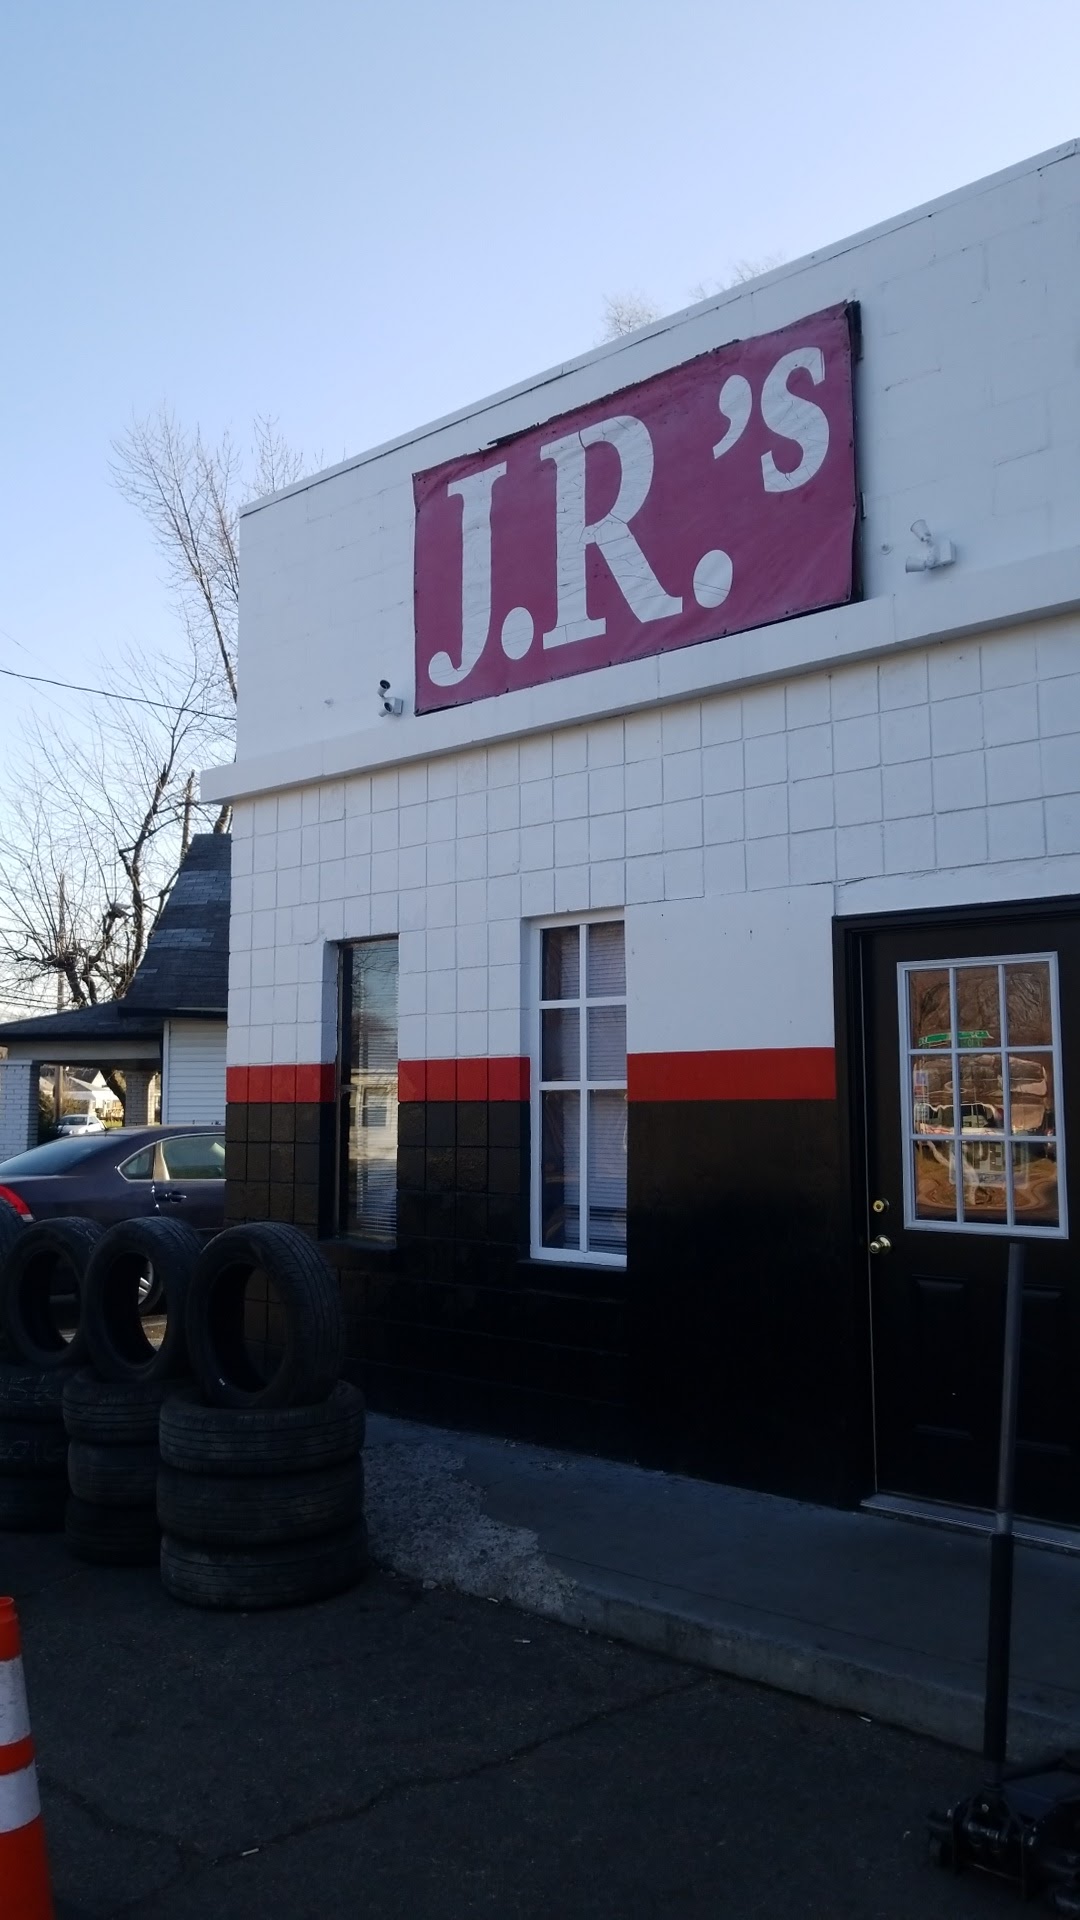 J.R.’s New & Used Tires